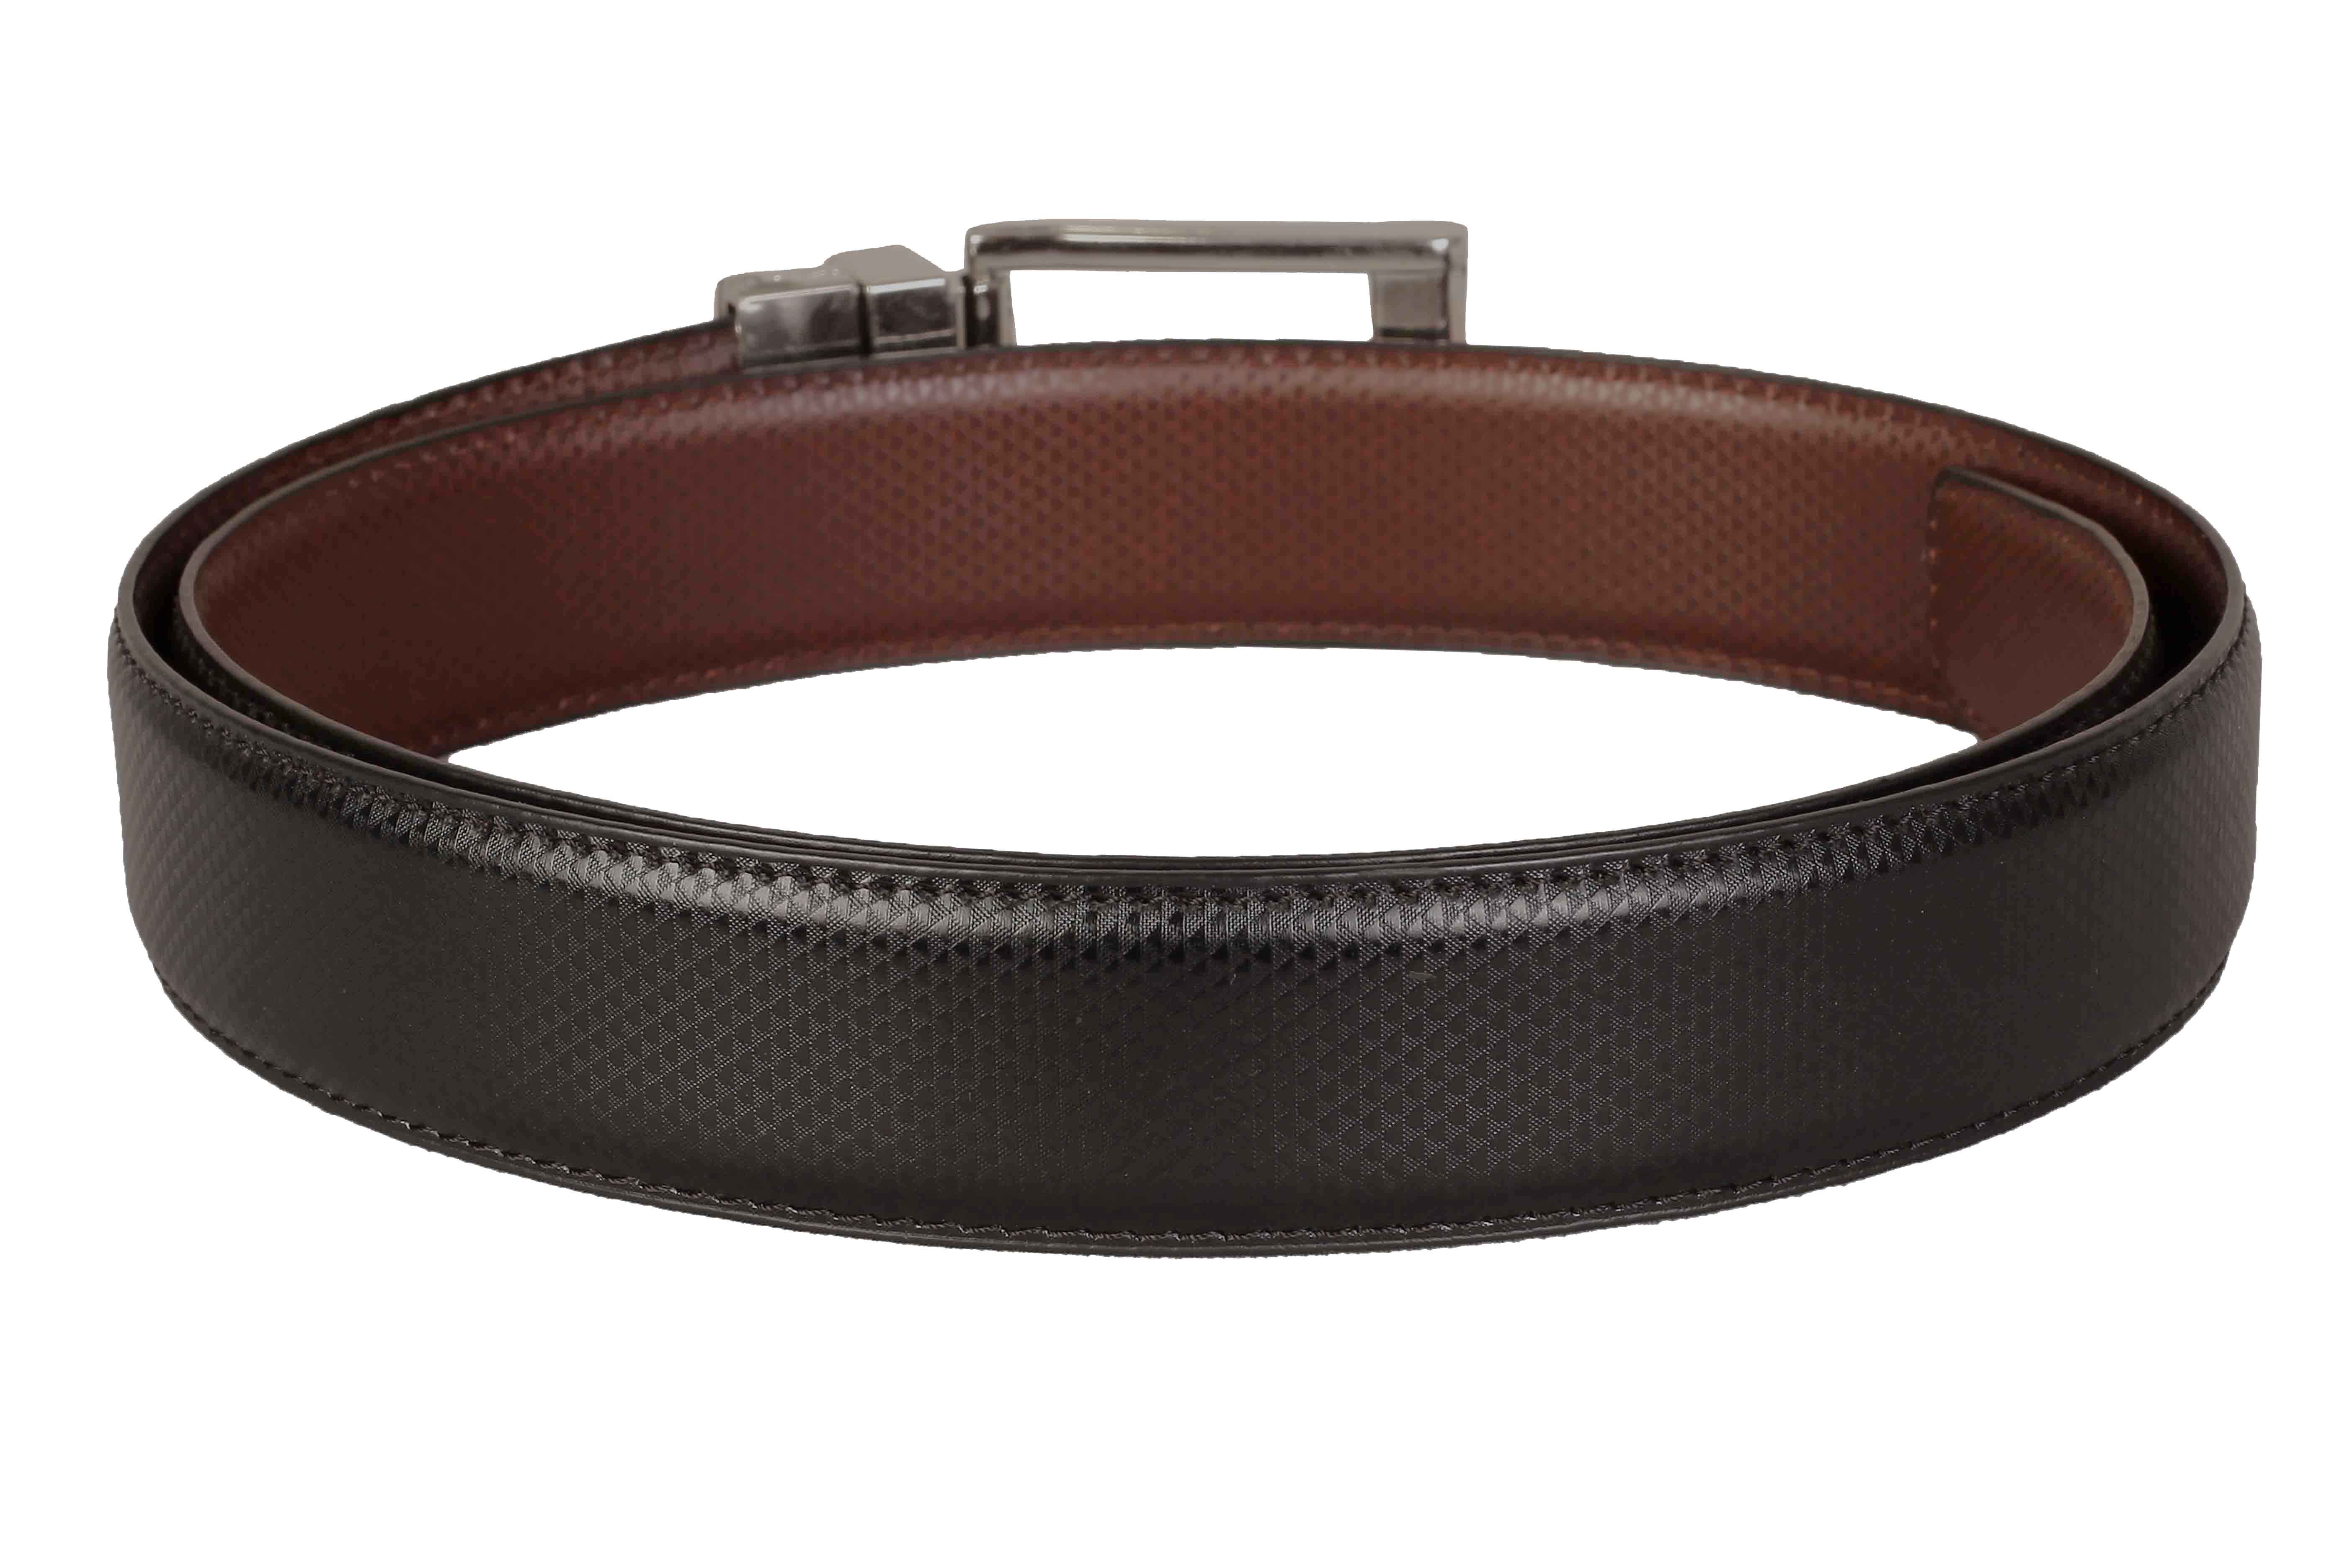 Adam Land Brown Leather Formal Belts: Buy Online at Low Price in India ...